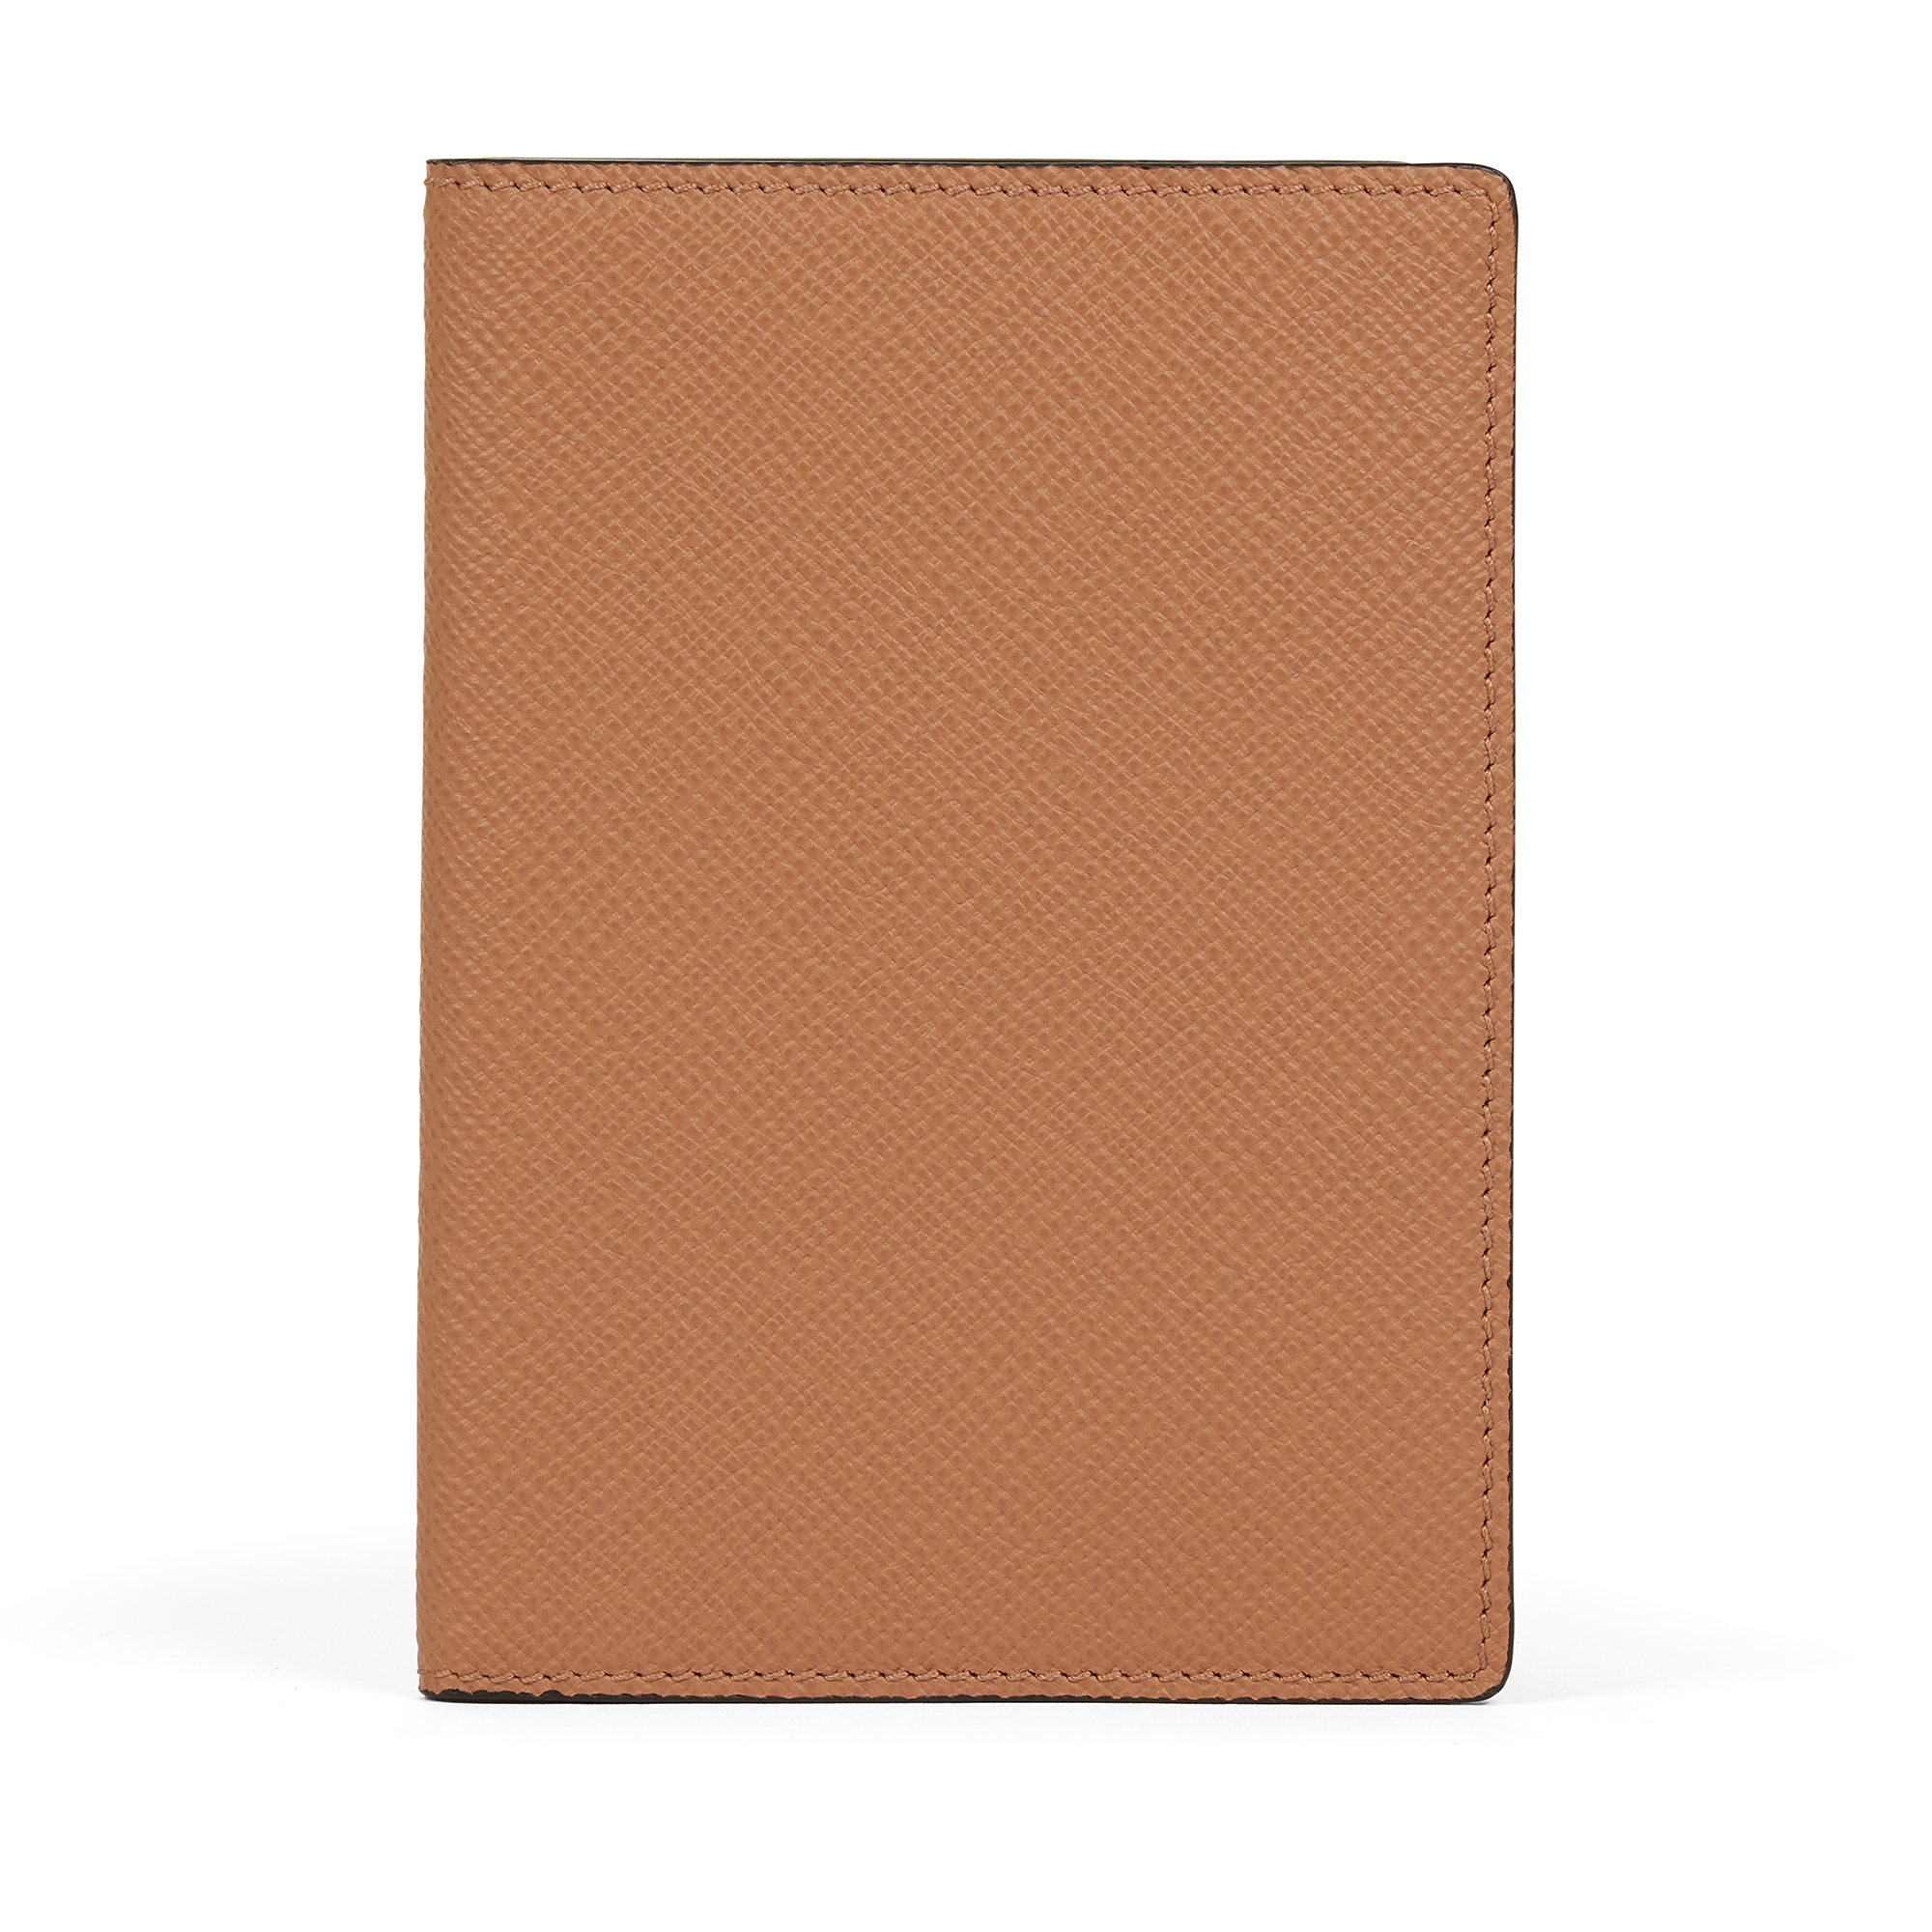 Smythson Passport Cover In Panama In Light Rosewood